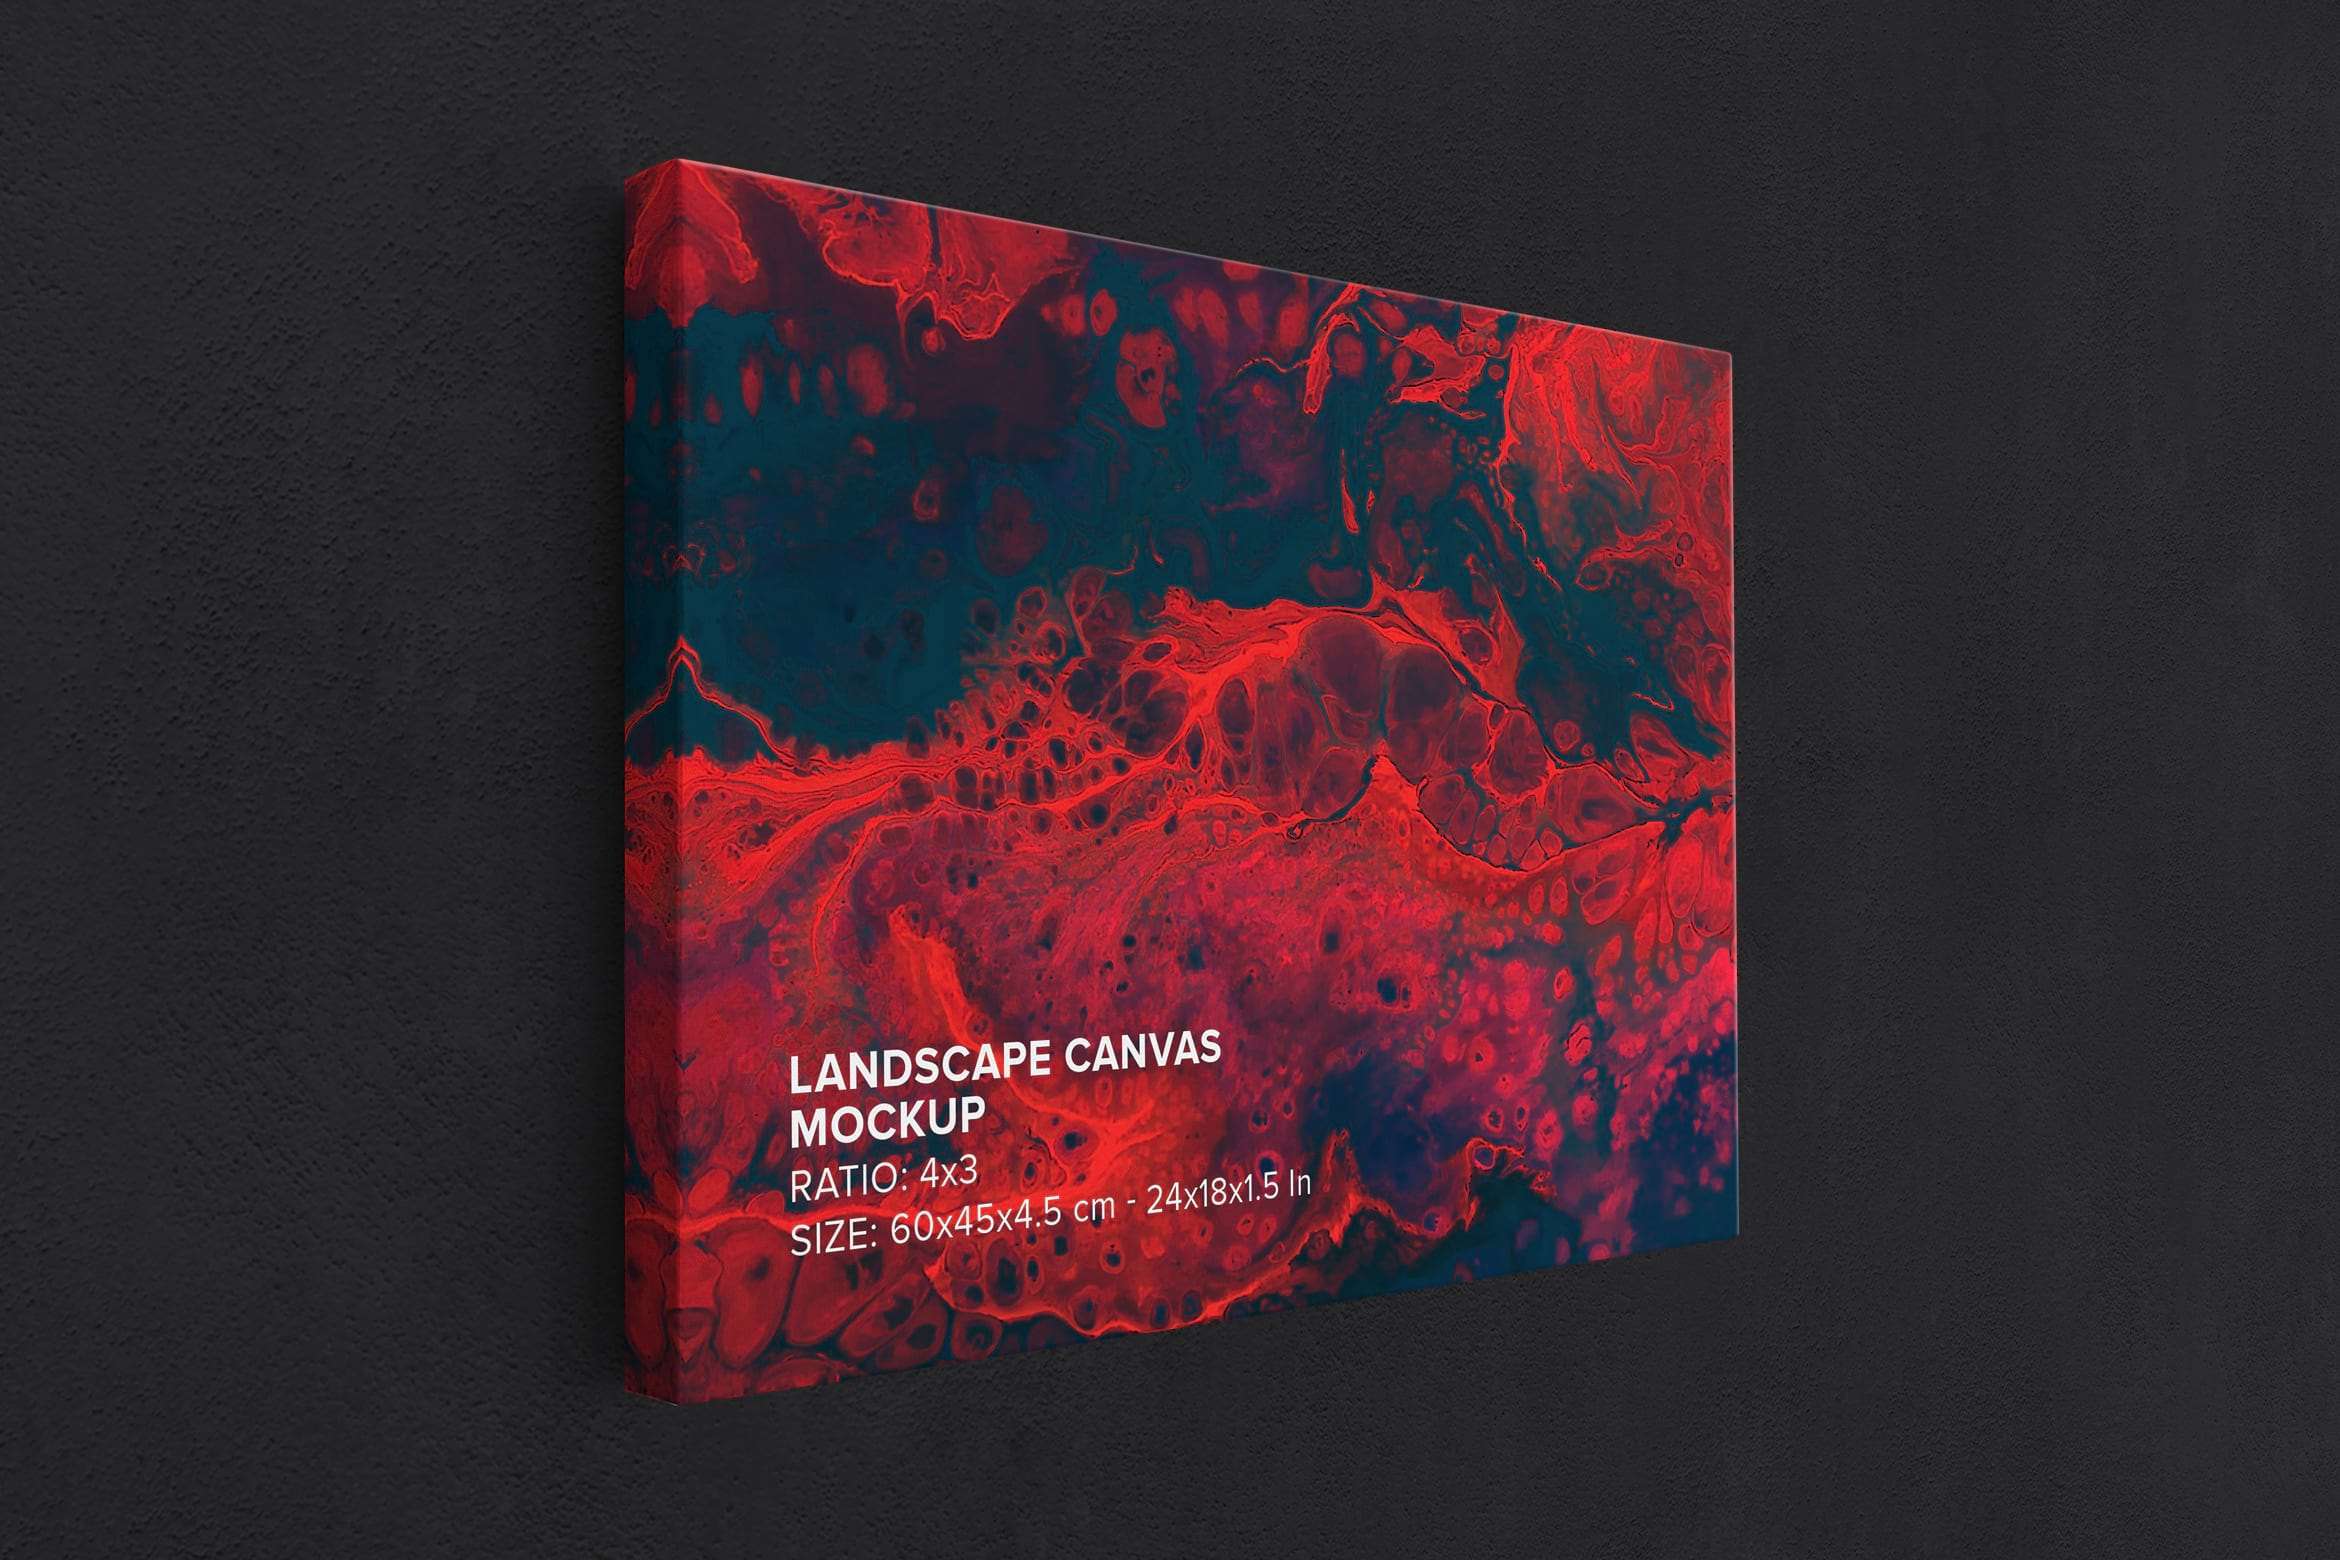 Art Wall Landscape Canvas Ratio 4x3 Mockup - Left 1.5 in Wrap View